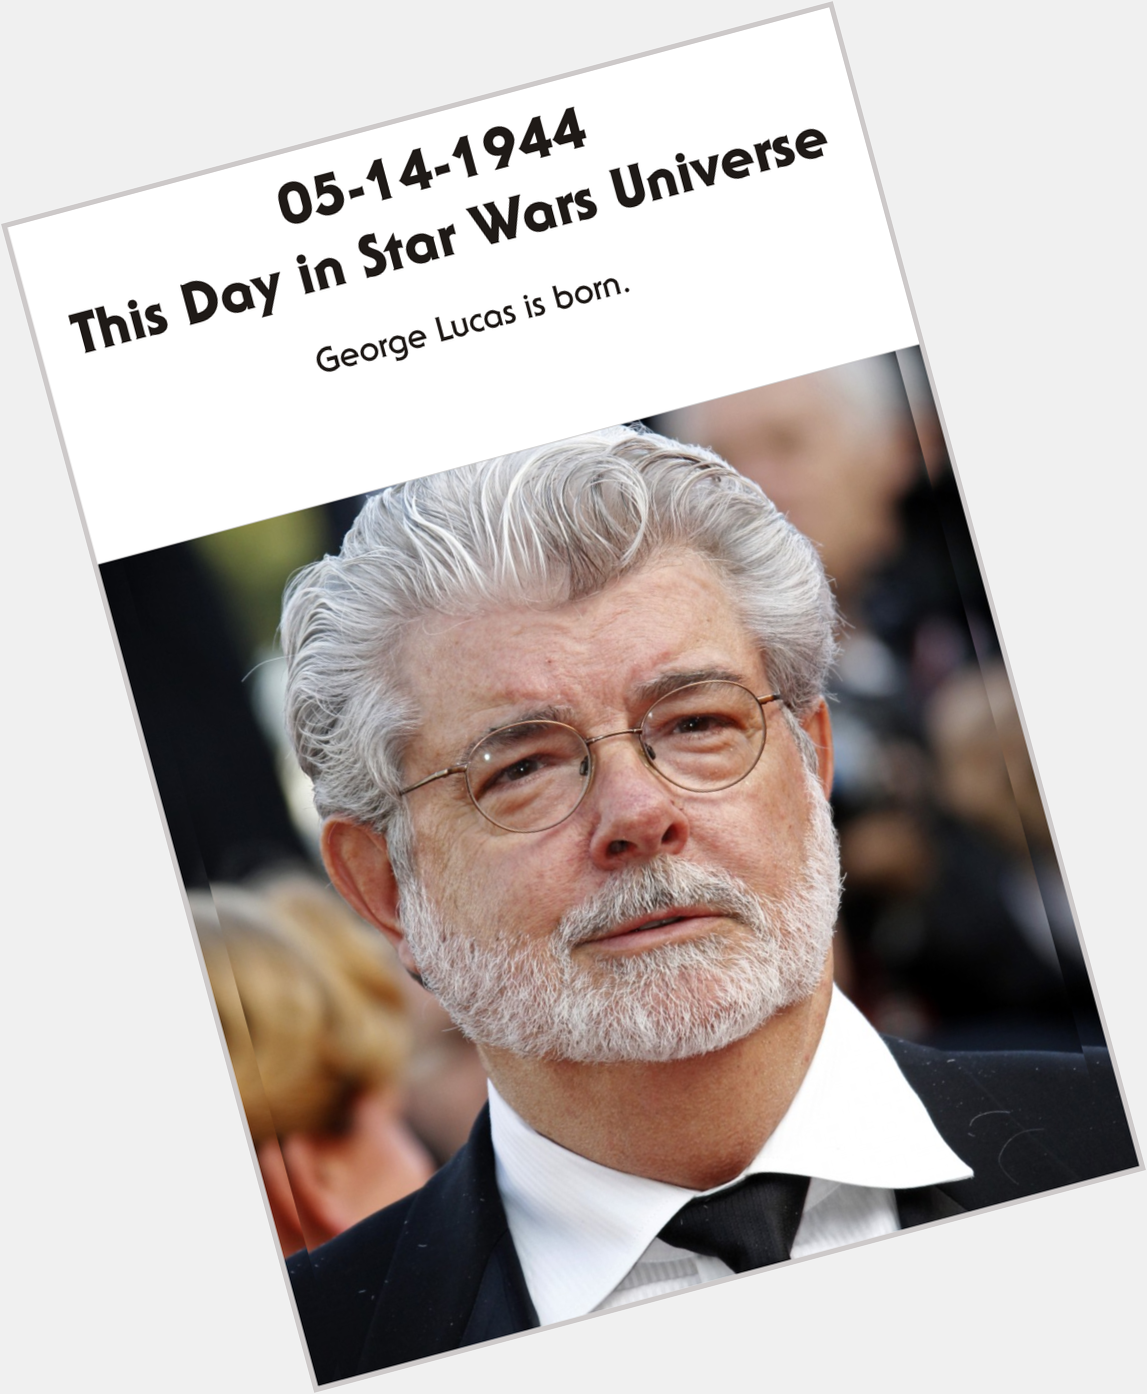 05-14-1944 From all of us here at Star Wars Universe, Happy 71st Birthday, George Lucas! 